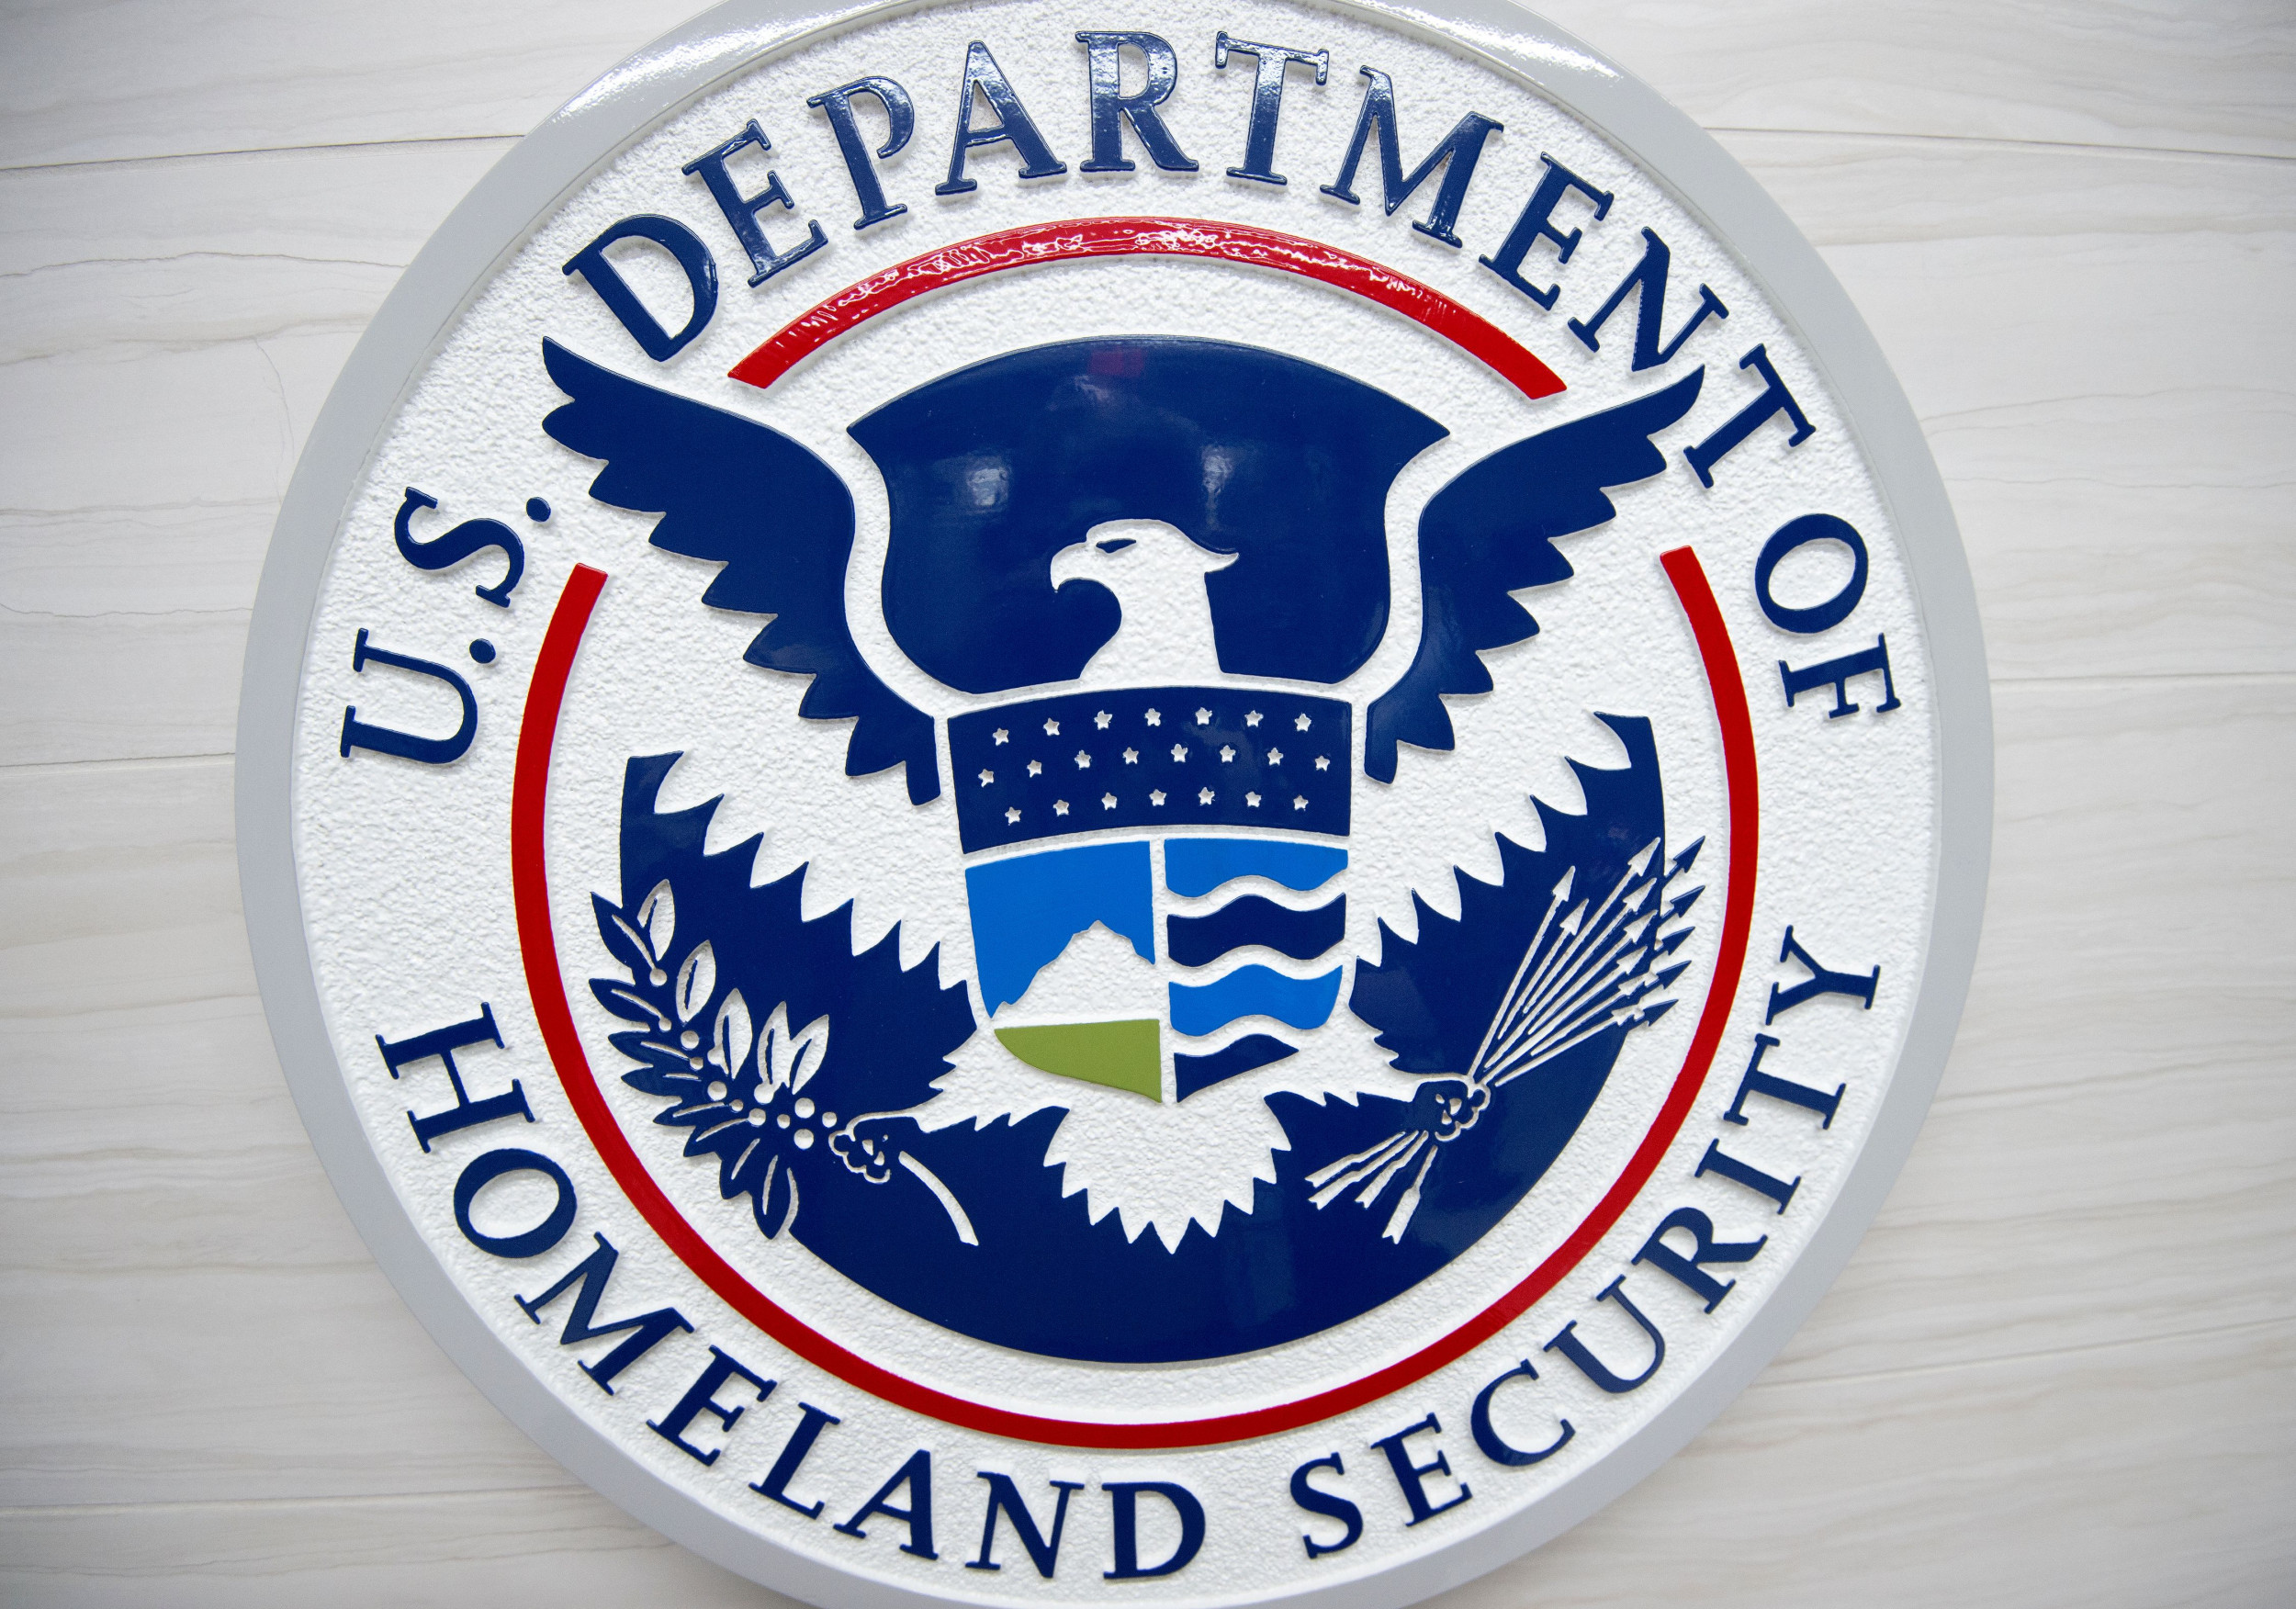 After 20 Years, the Department of Homeland Security Is a Money-Guzzling Failure